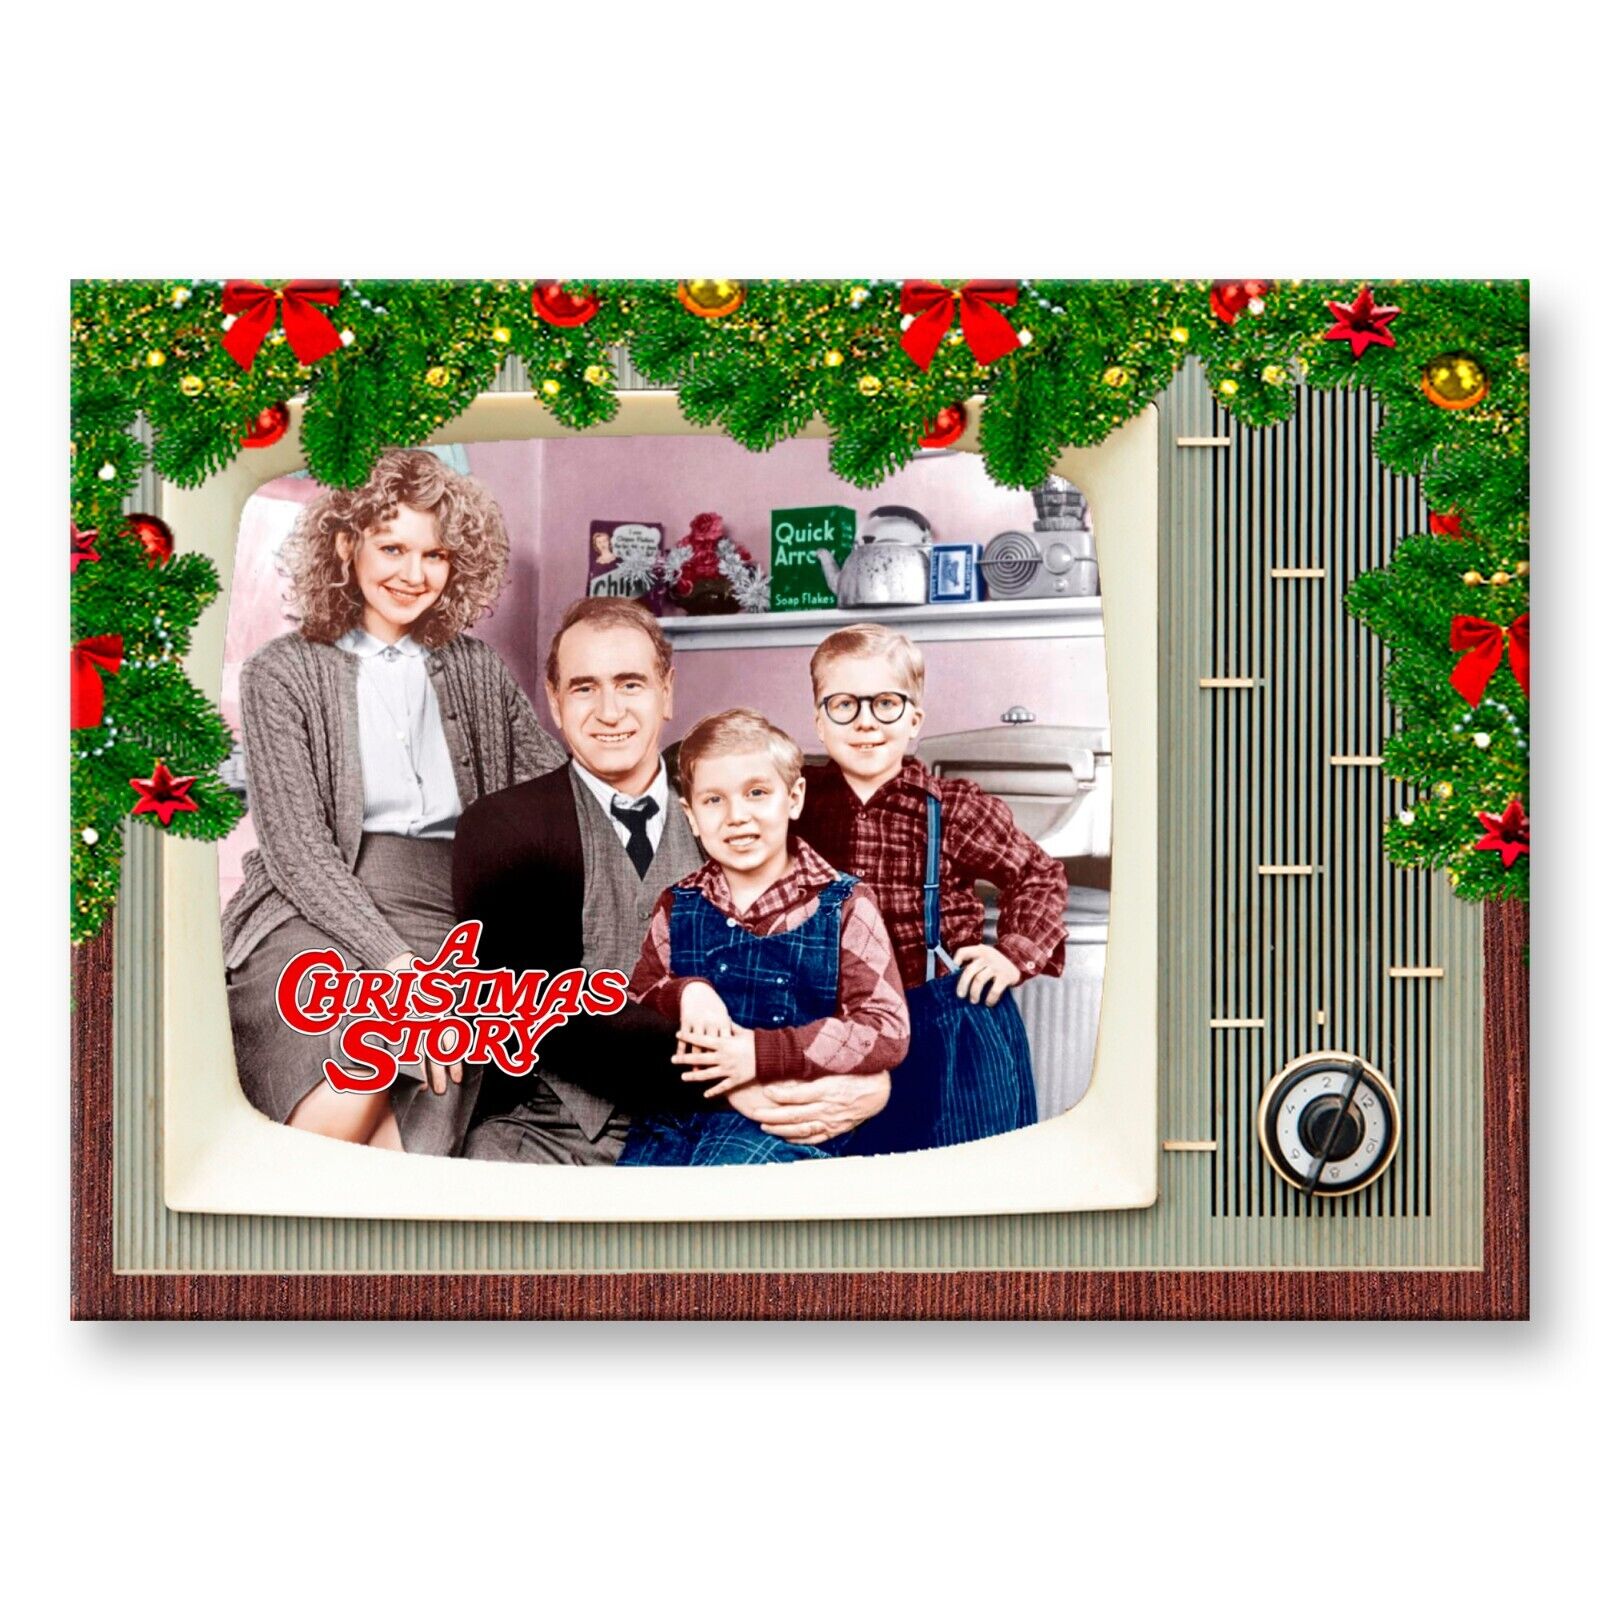 A Christmas Story Classic TV 3.5 inches x 2.5 inches Steel Fridge Magnet